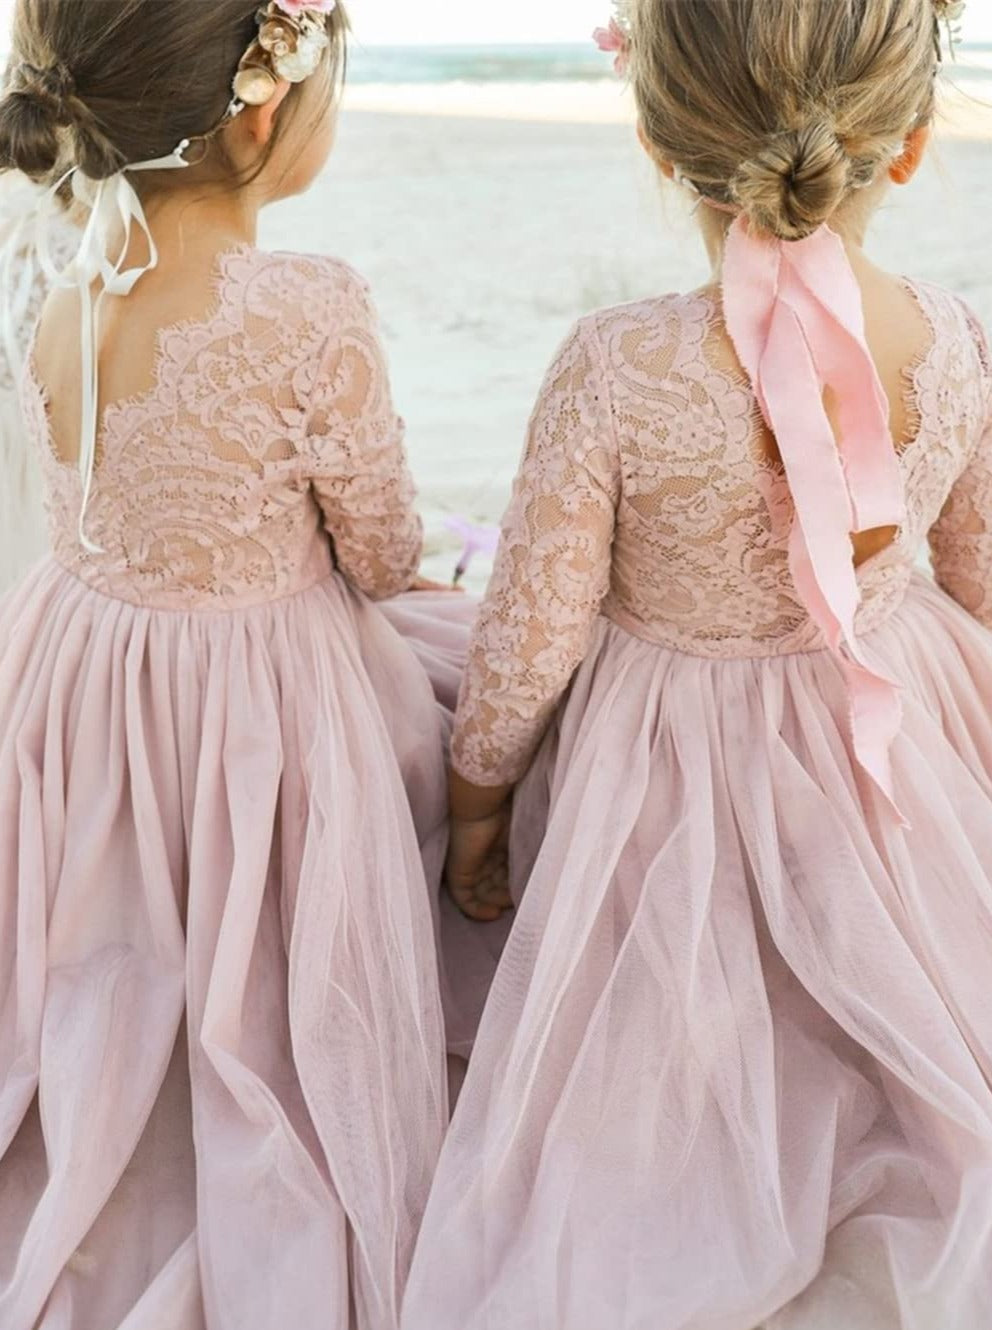 Paisley Lace Flower Girl Dress in Dusty Pink Long-Sleeve Floor-Length Tulle A-Line V-Back Scoop